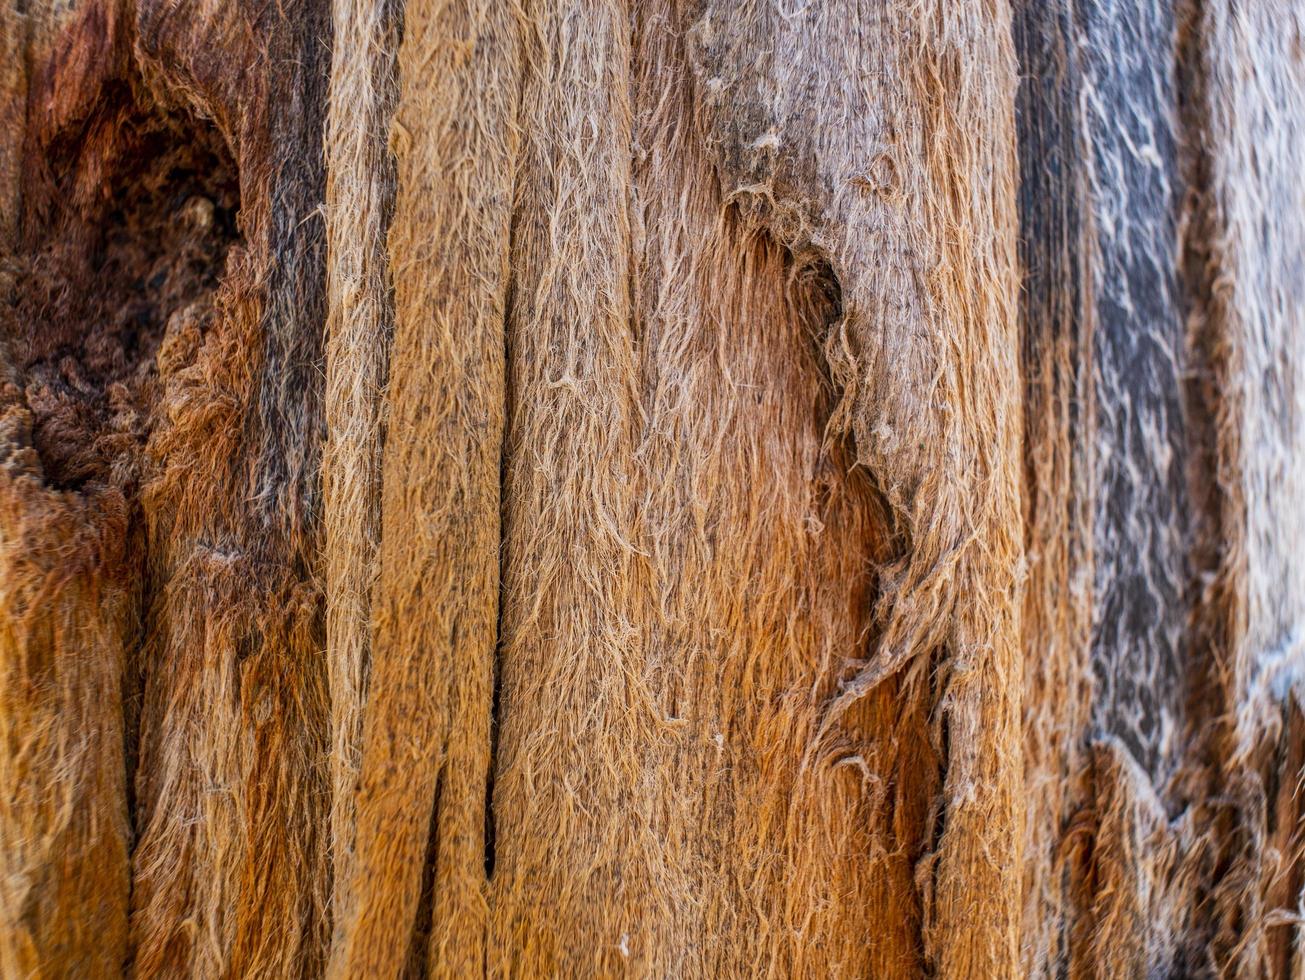 Abstract texture of old wood formed by time and nature. Wooden texture background photo